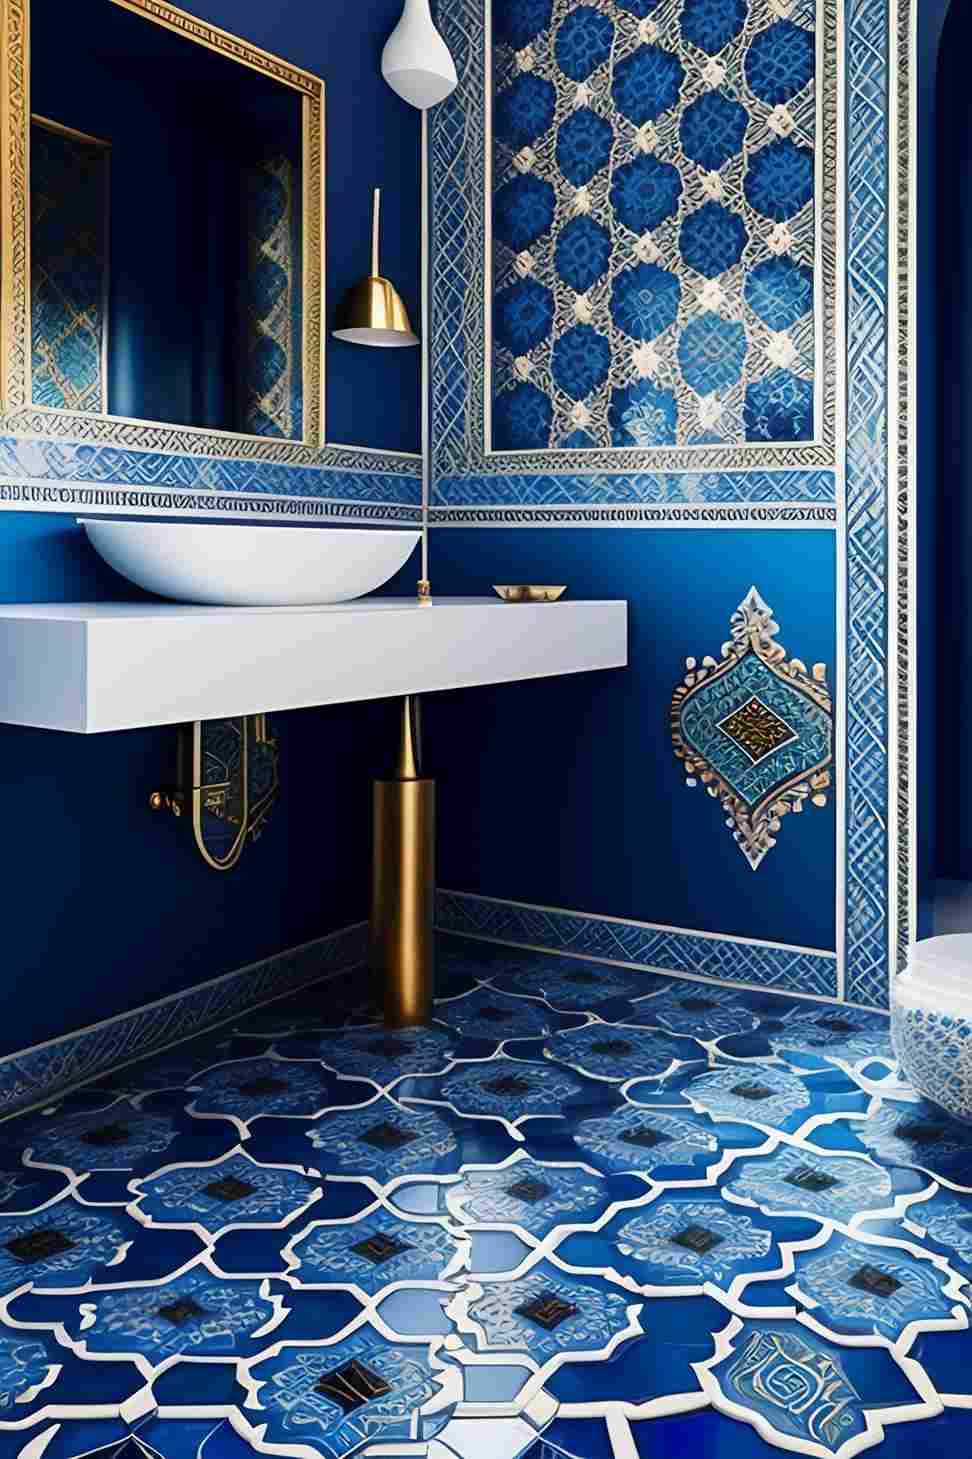 Blue tile design in shades of blue_11zon